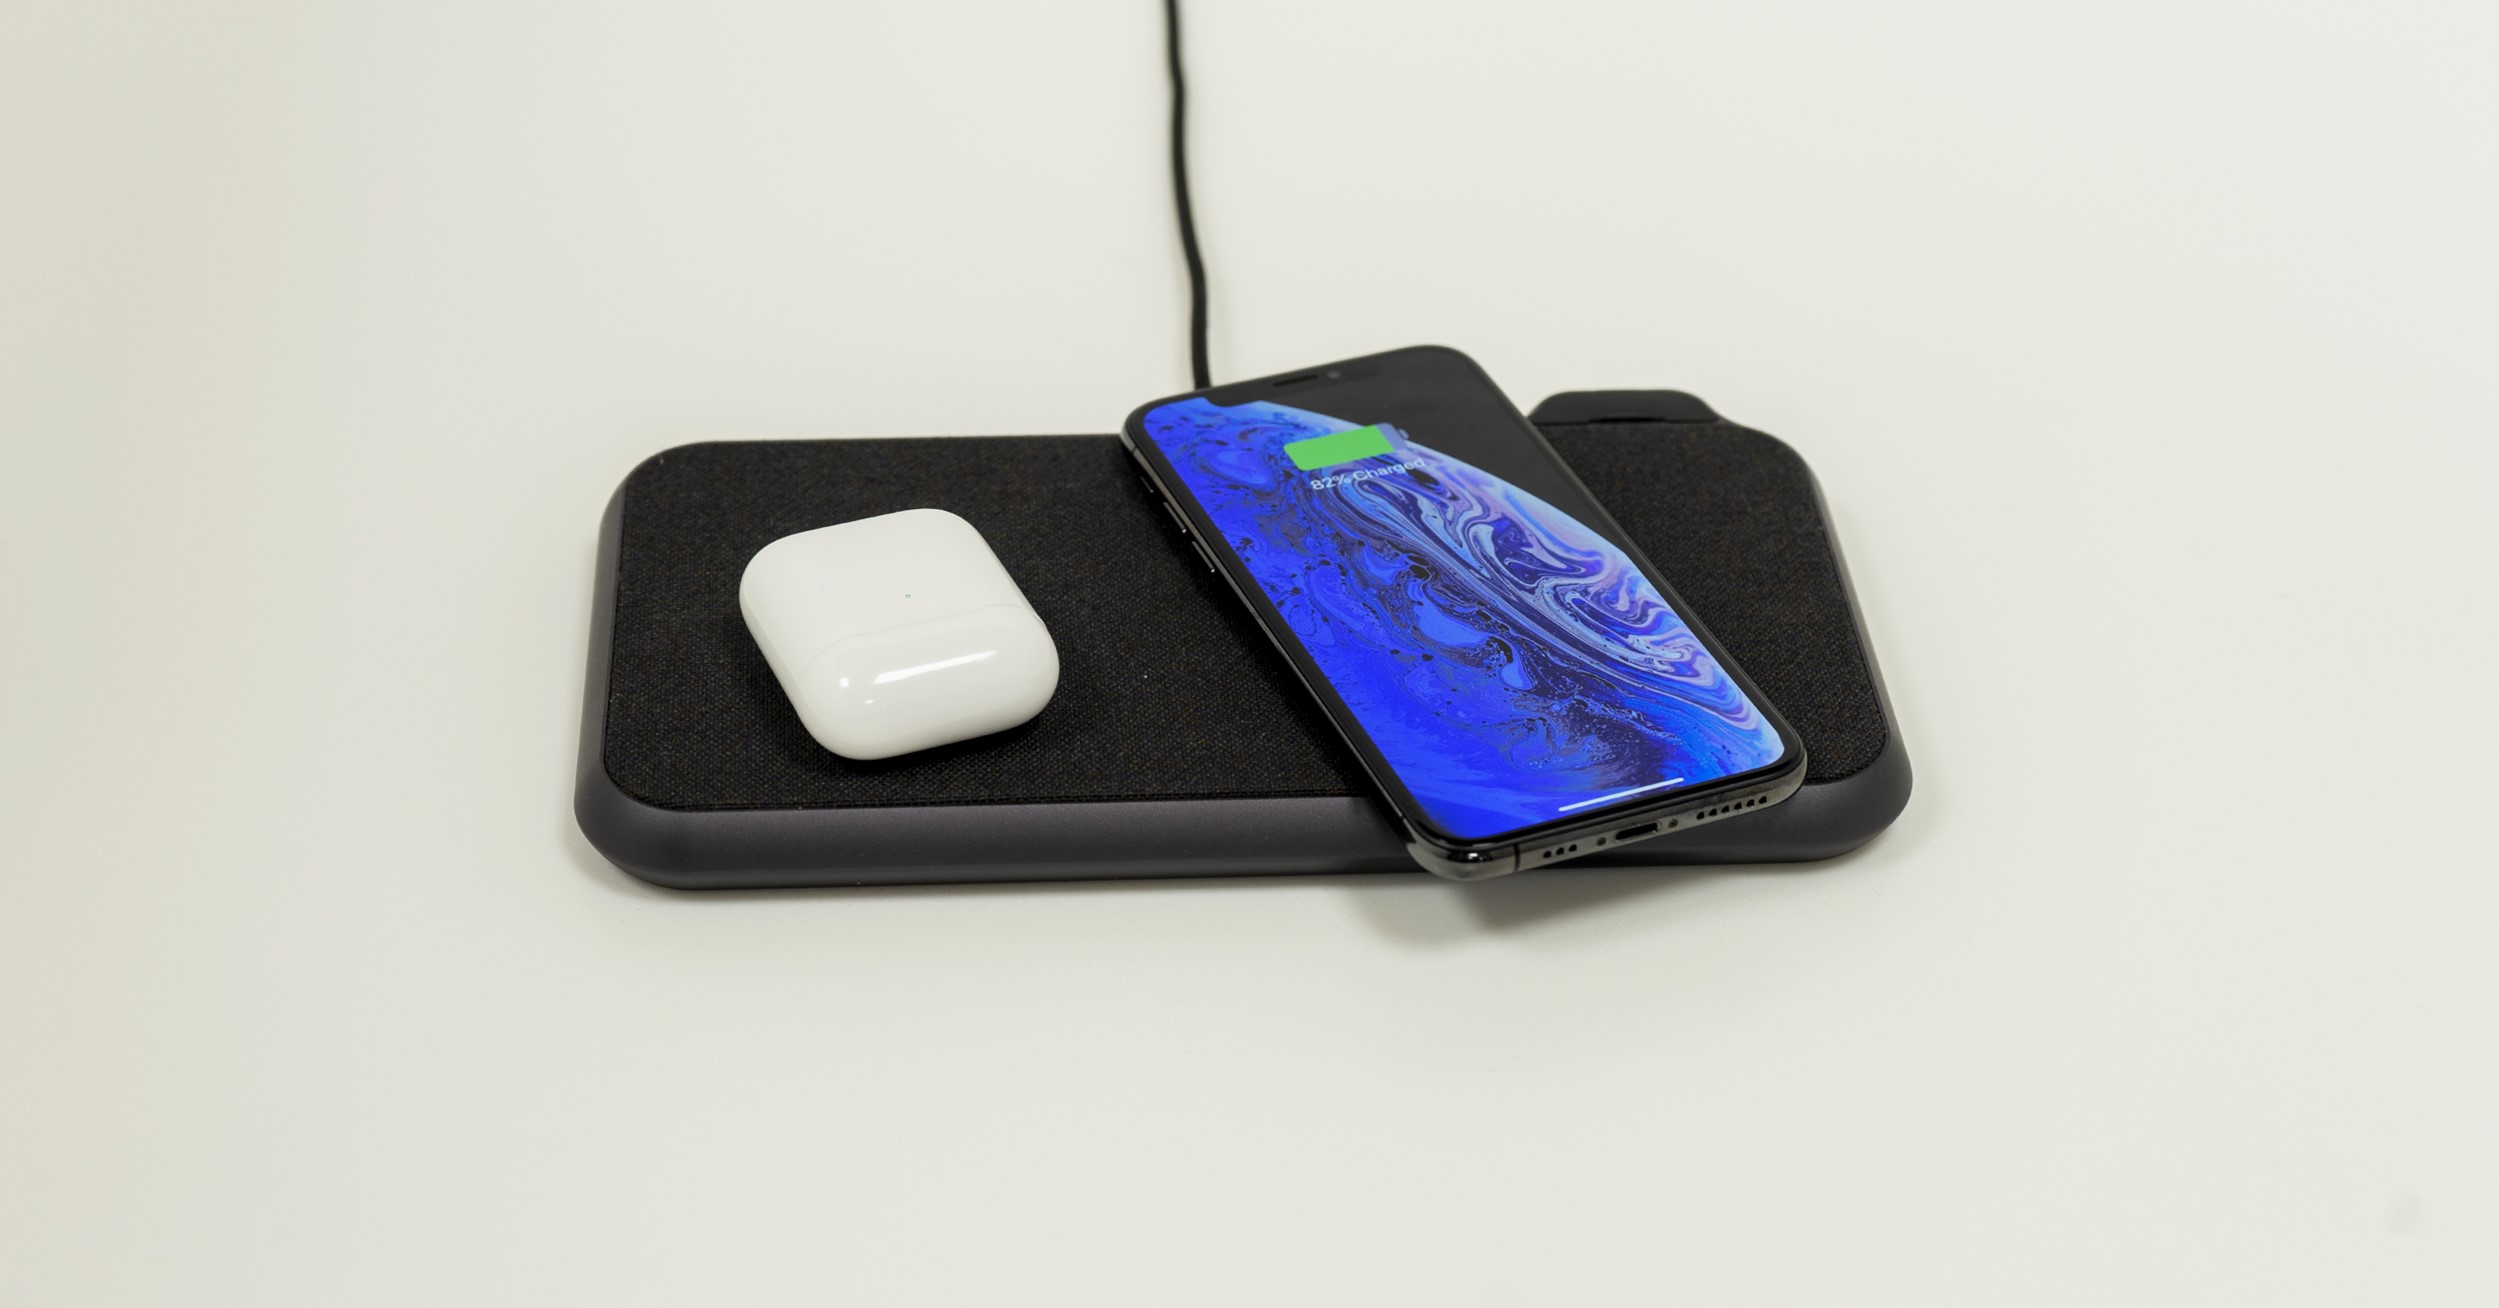 ZENS LIBERTY 16-coils wireless charger, Kvadrat edition with Apple AirPods and iPhone Xs